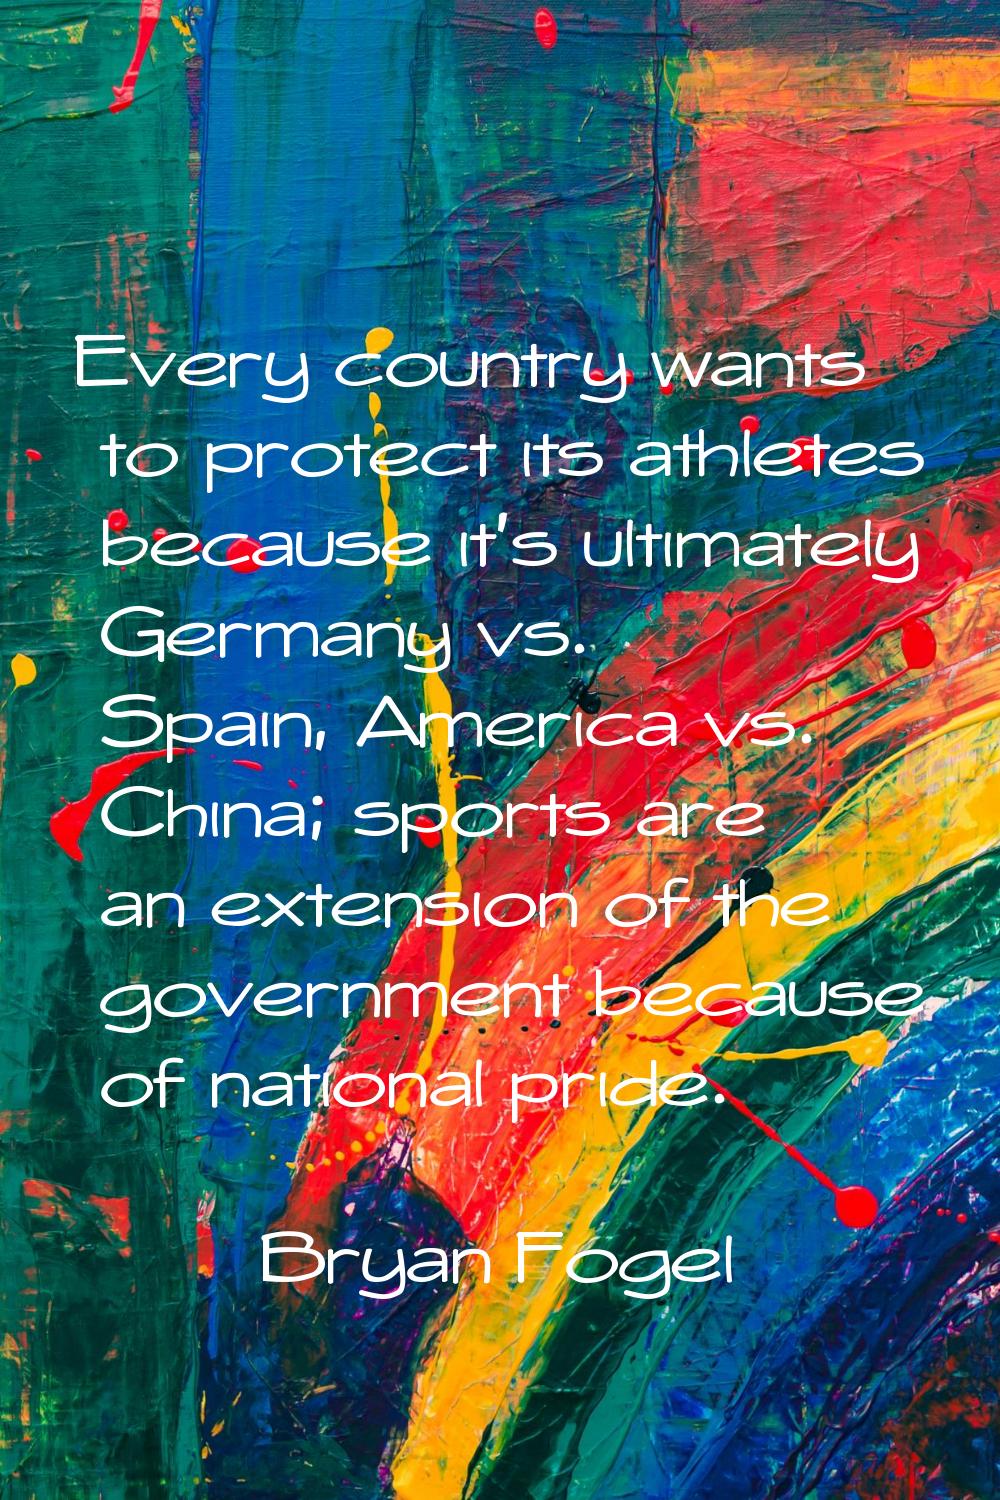 Every country wants to protect its athletes because it's ultimately Germany vs. Spain, America vs. 